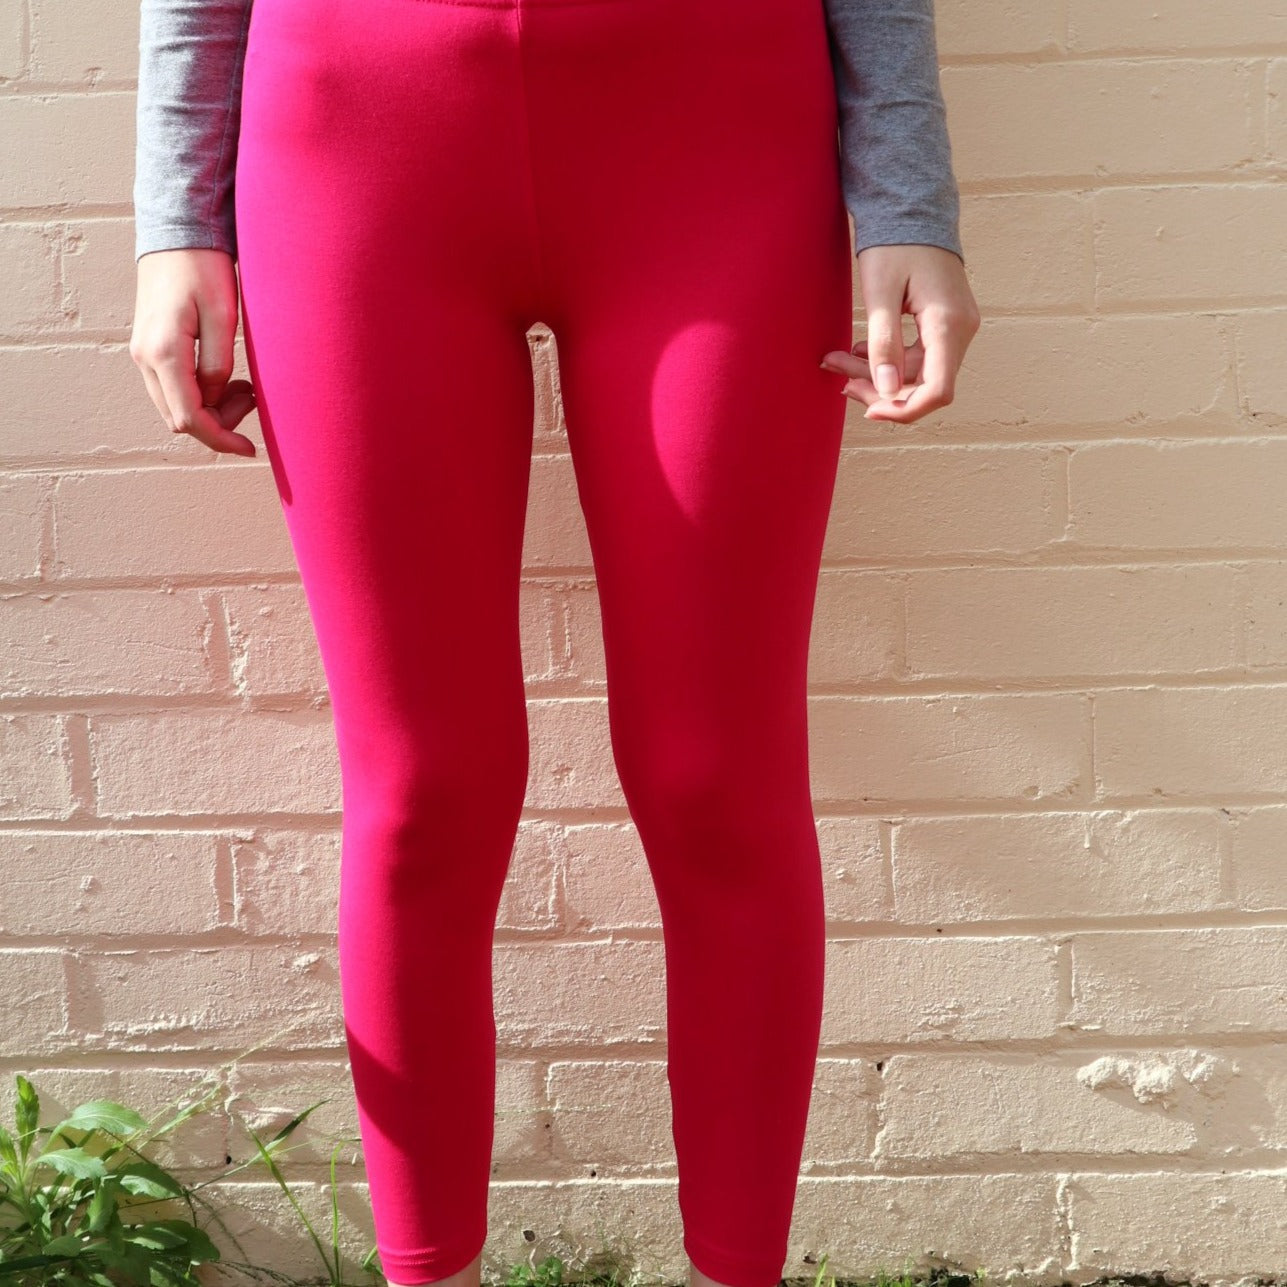 Organic Cotton leggings in a reddy pink colour